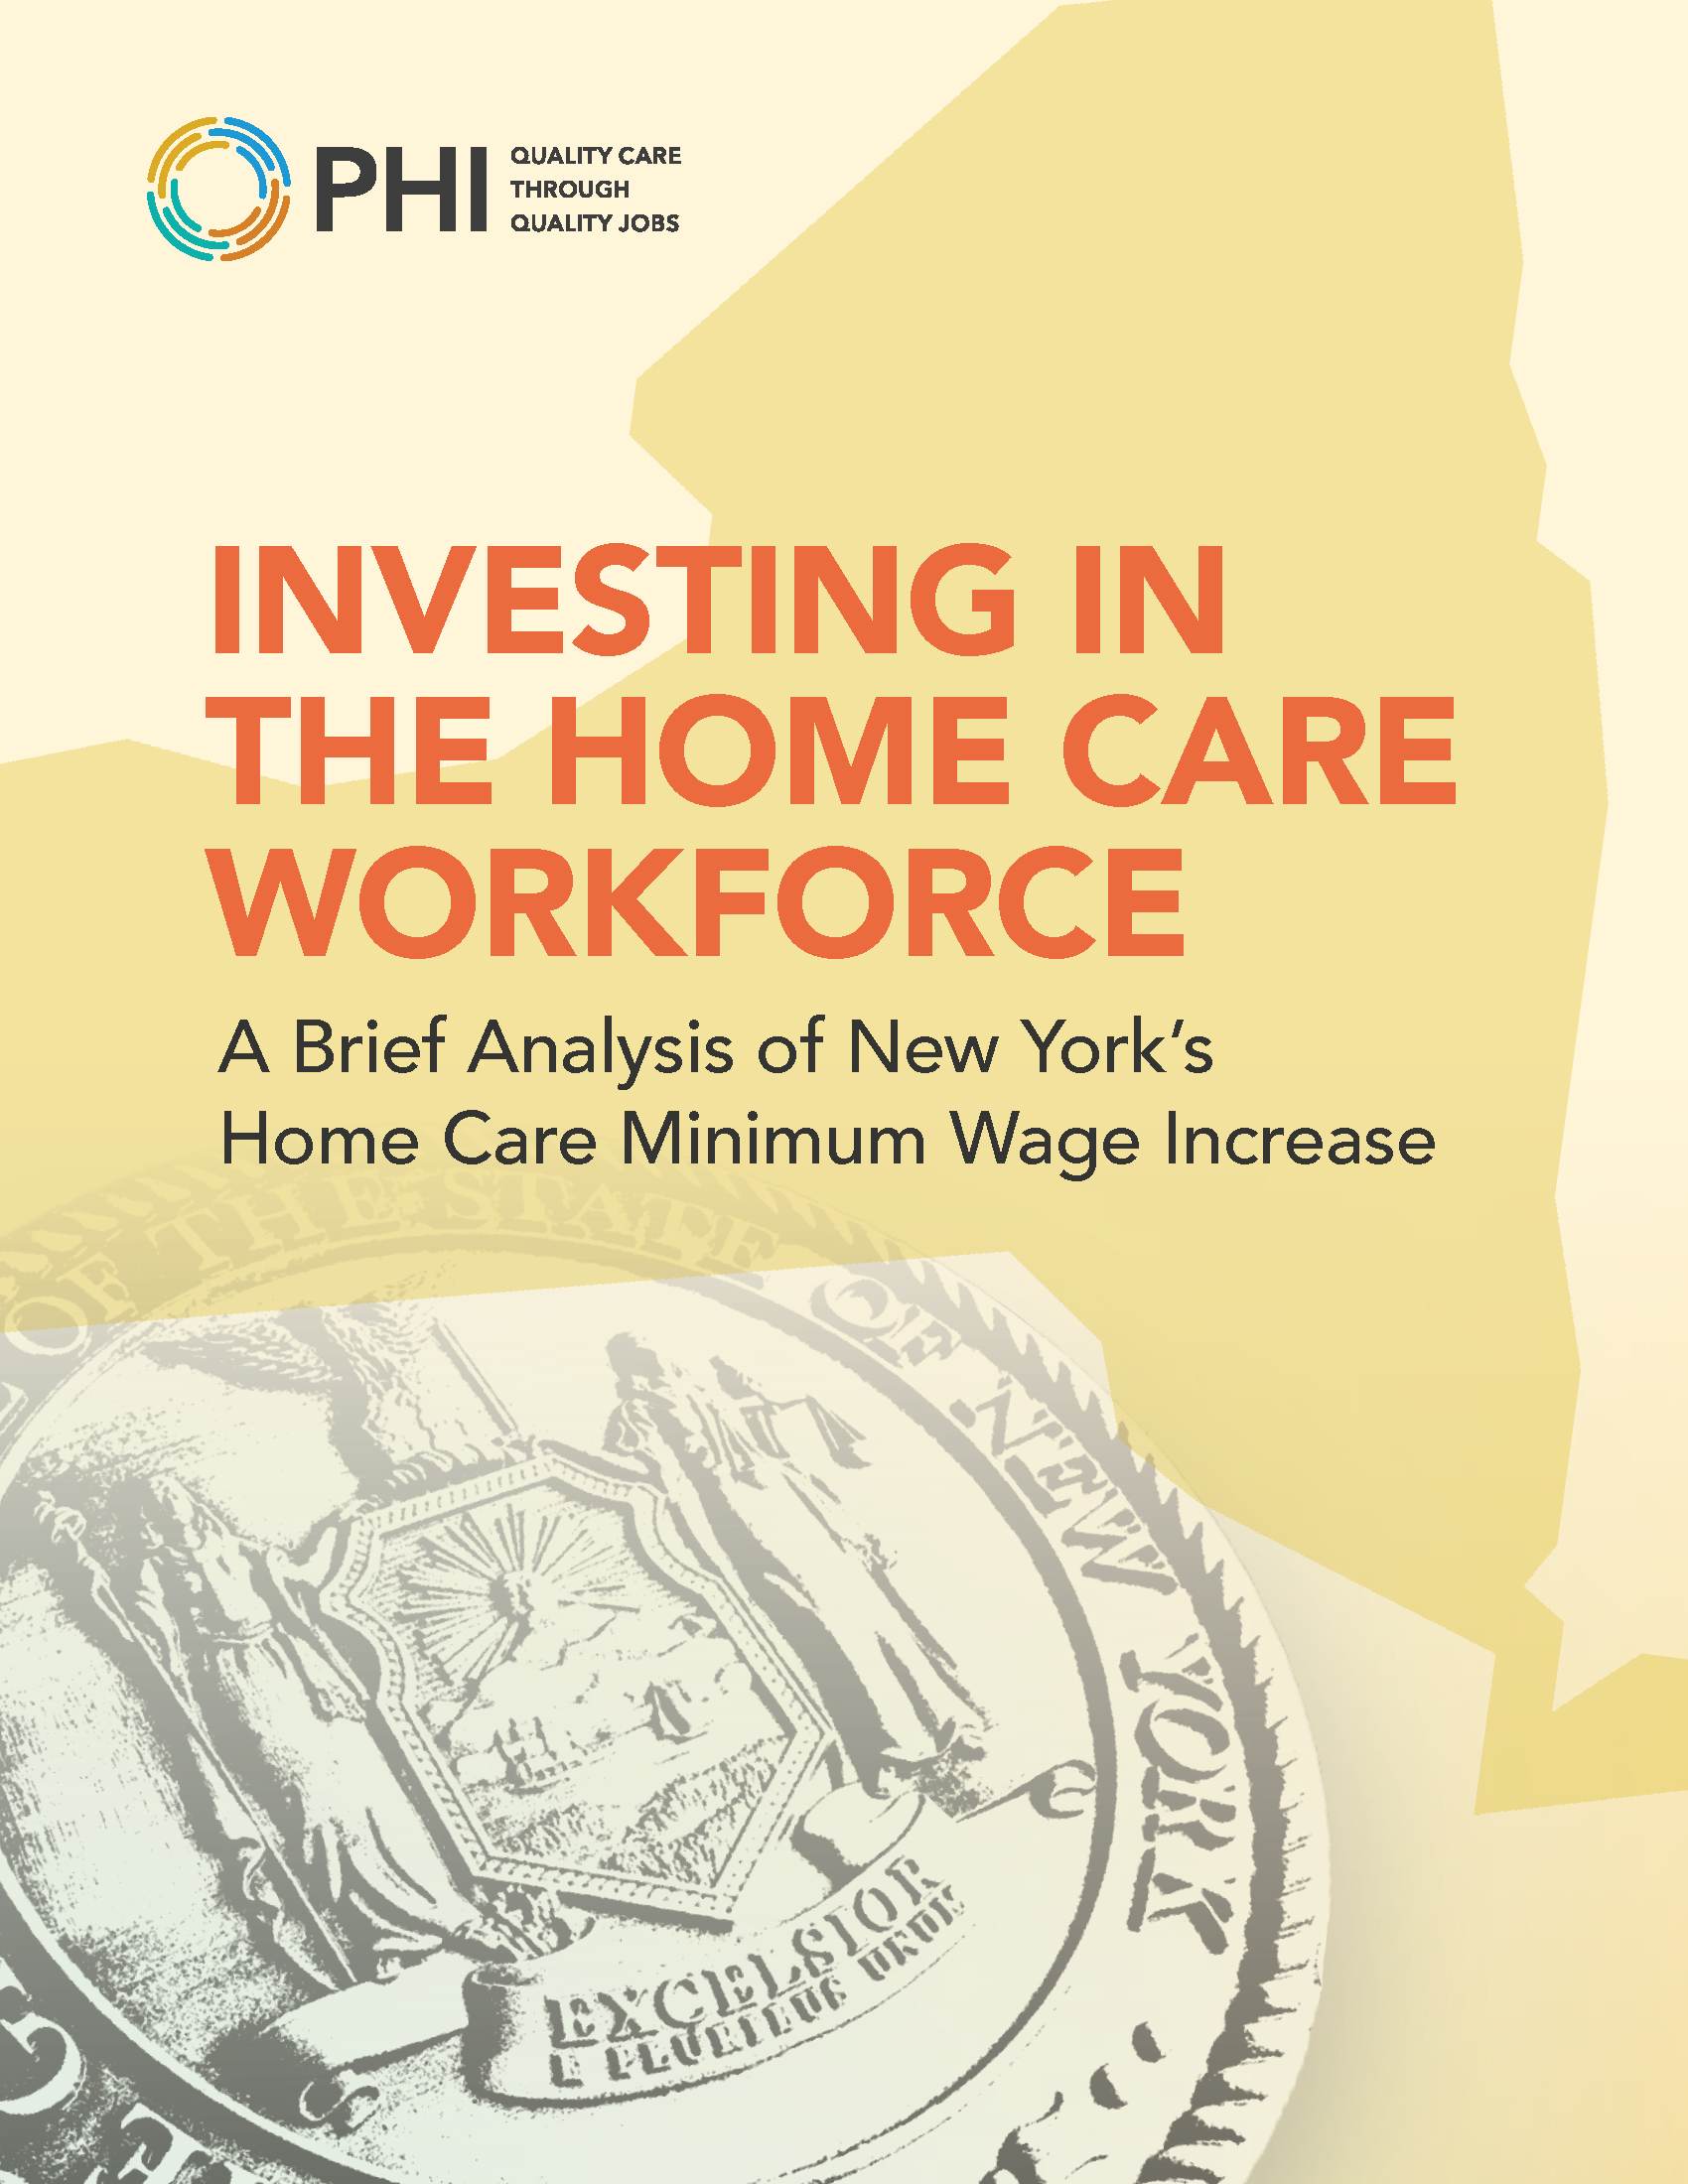 Investing in the Home Care Workforce: A Brief Analysis of New York’s Home Care Minimum Wage Increase